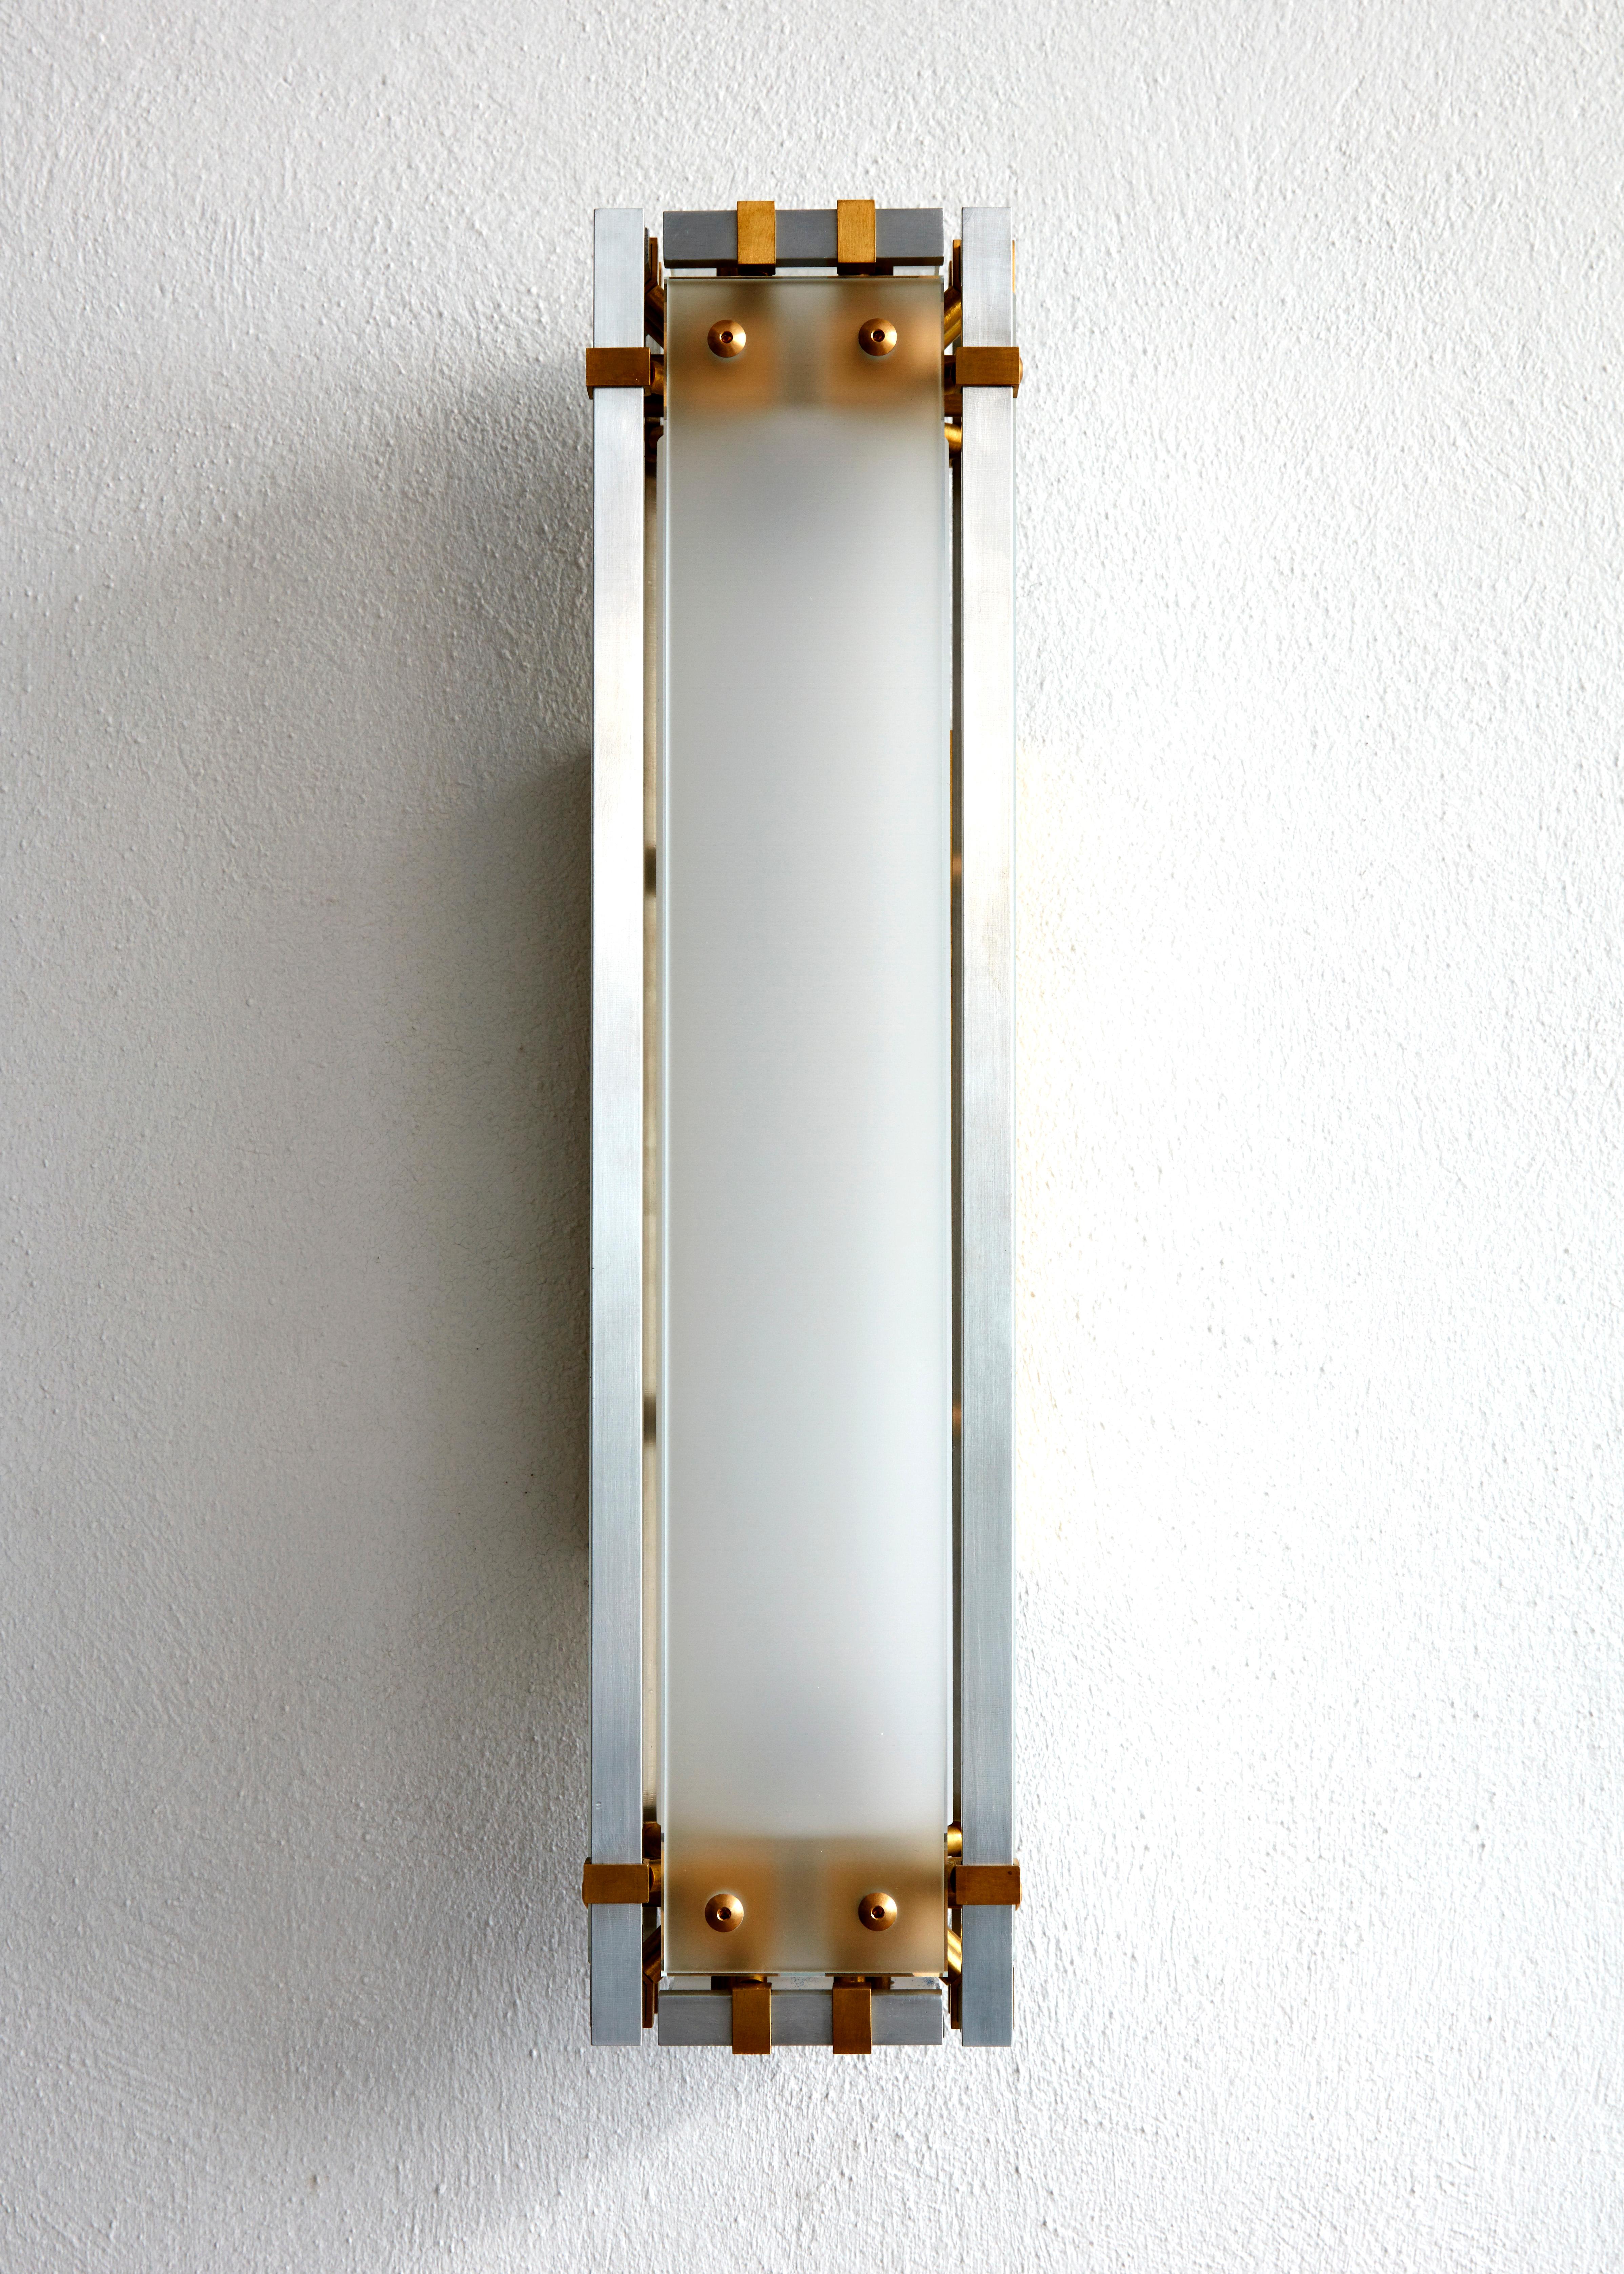 Joinery Wall Sconce by Billy Cotton in Aluminum, Brass and Acid-Etched Glass (amerikanisch) im Angebot